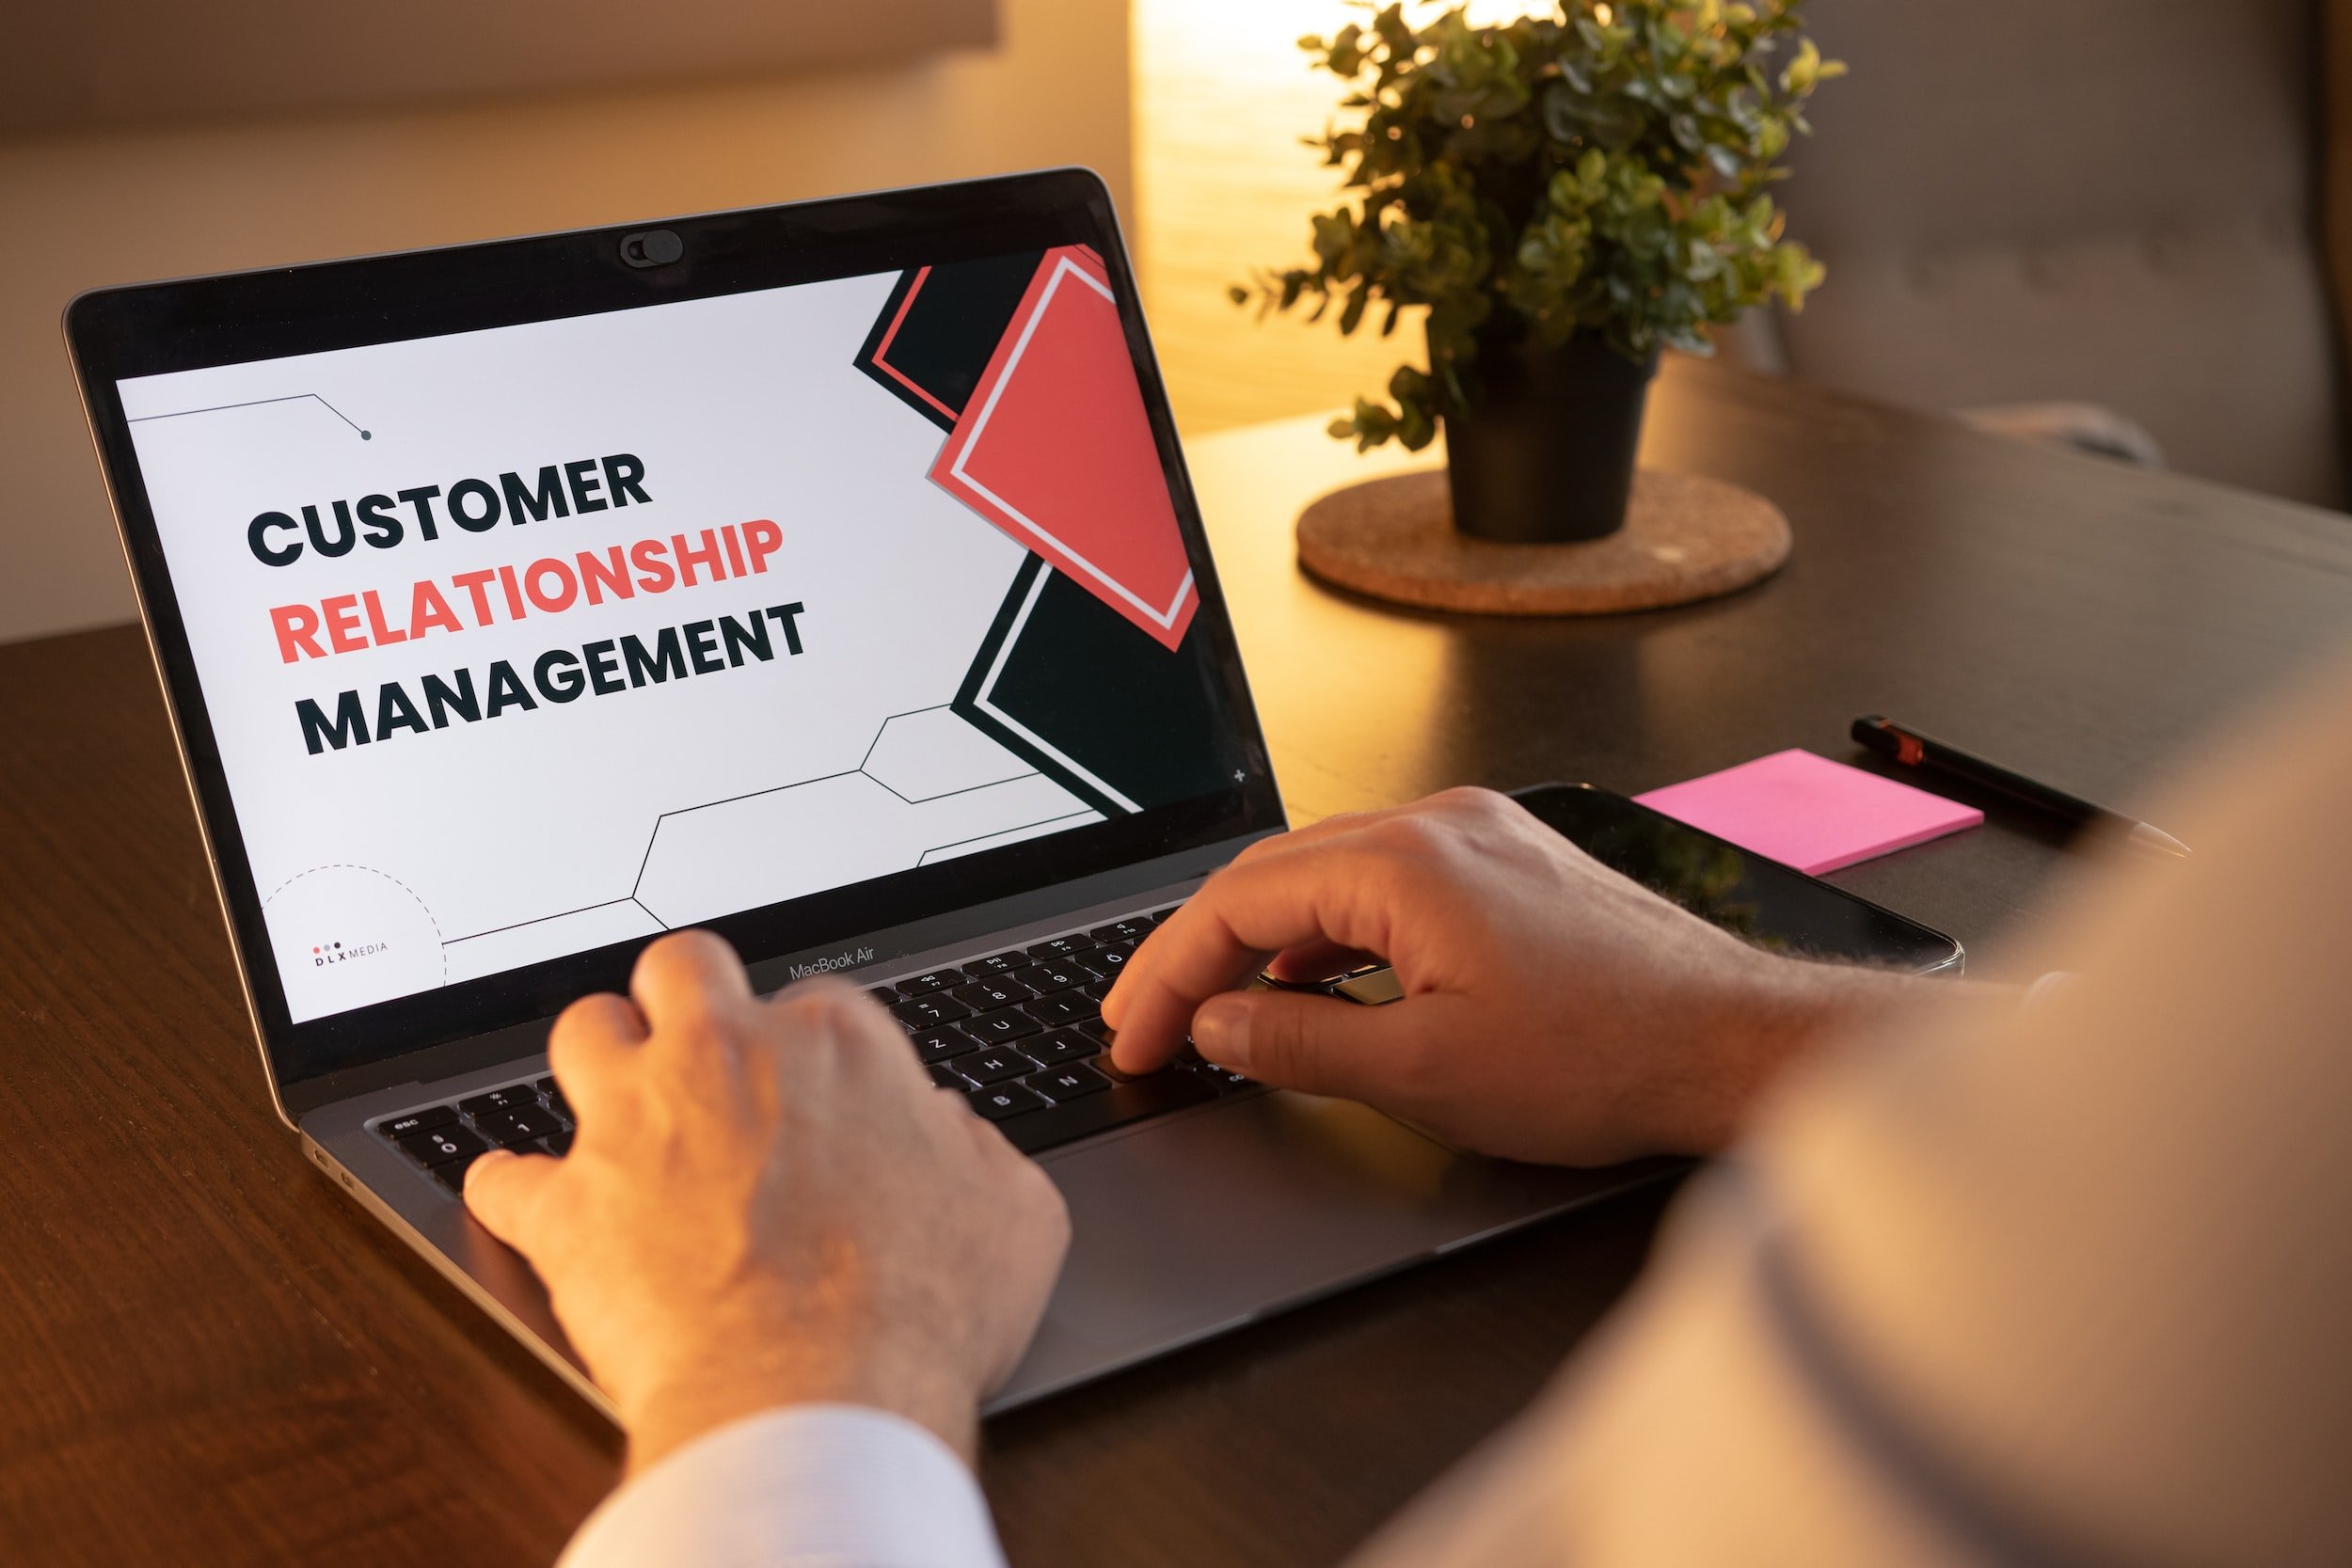 Customer Relationship Management (CRM) systems are essential for businesses of all sizes. They help you track and manage customer interactions, sales, and marketing campaigns.